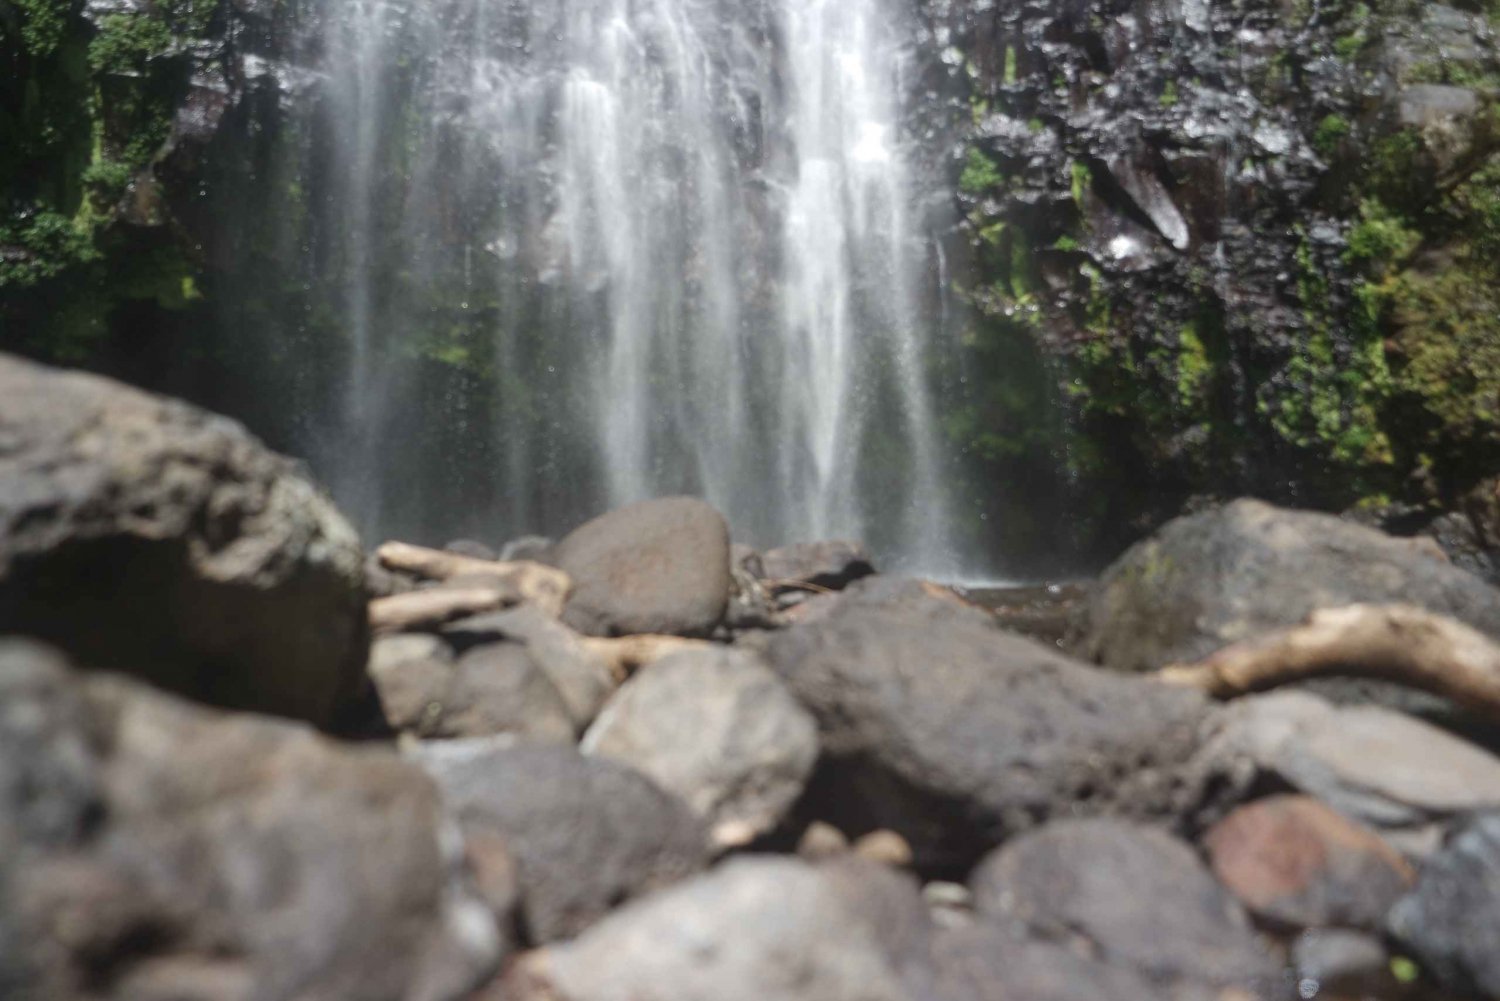 From Moshi: Materuni Waterfalls and Coffee Farm Day Tour